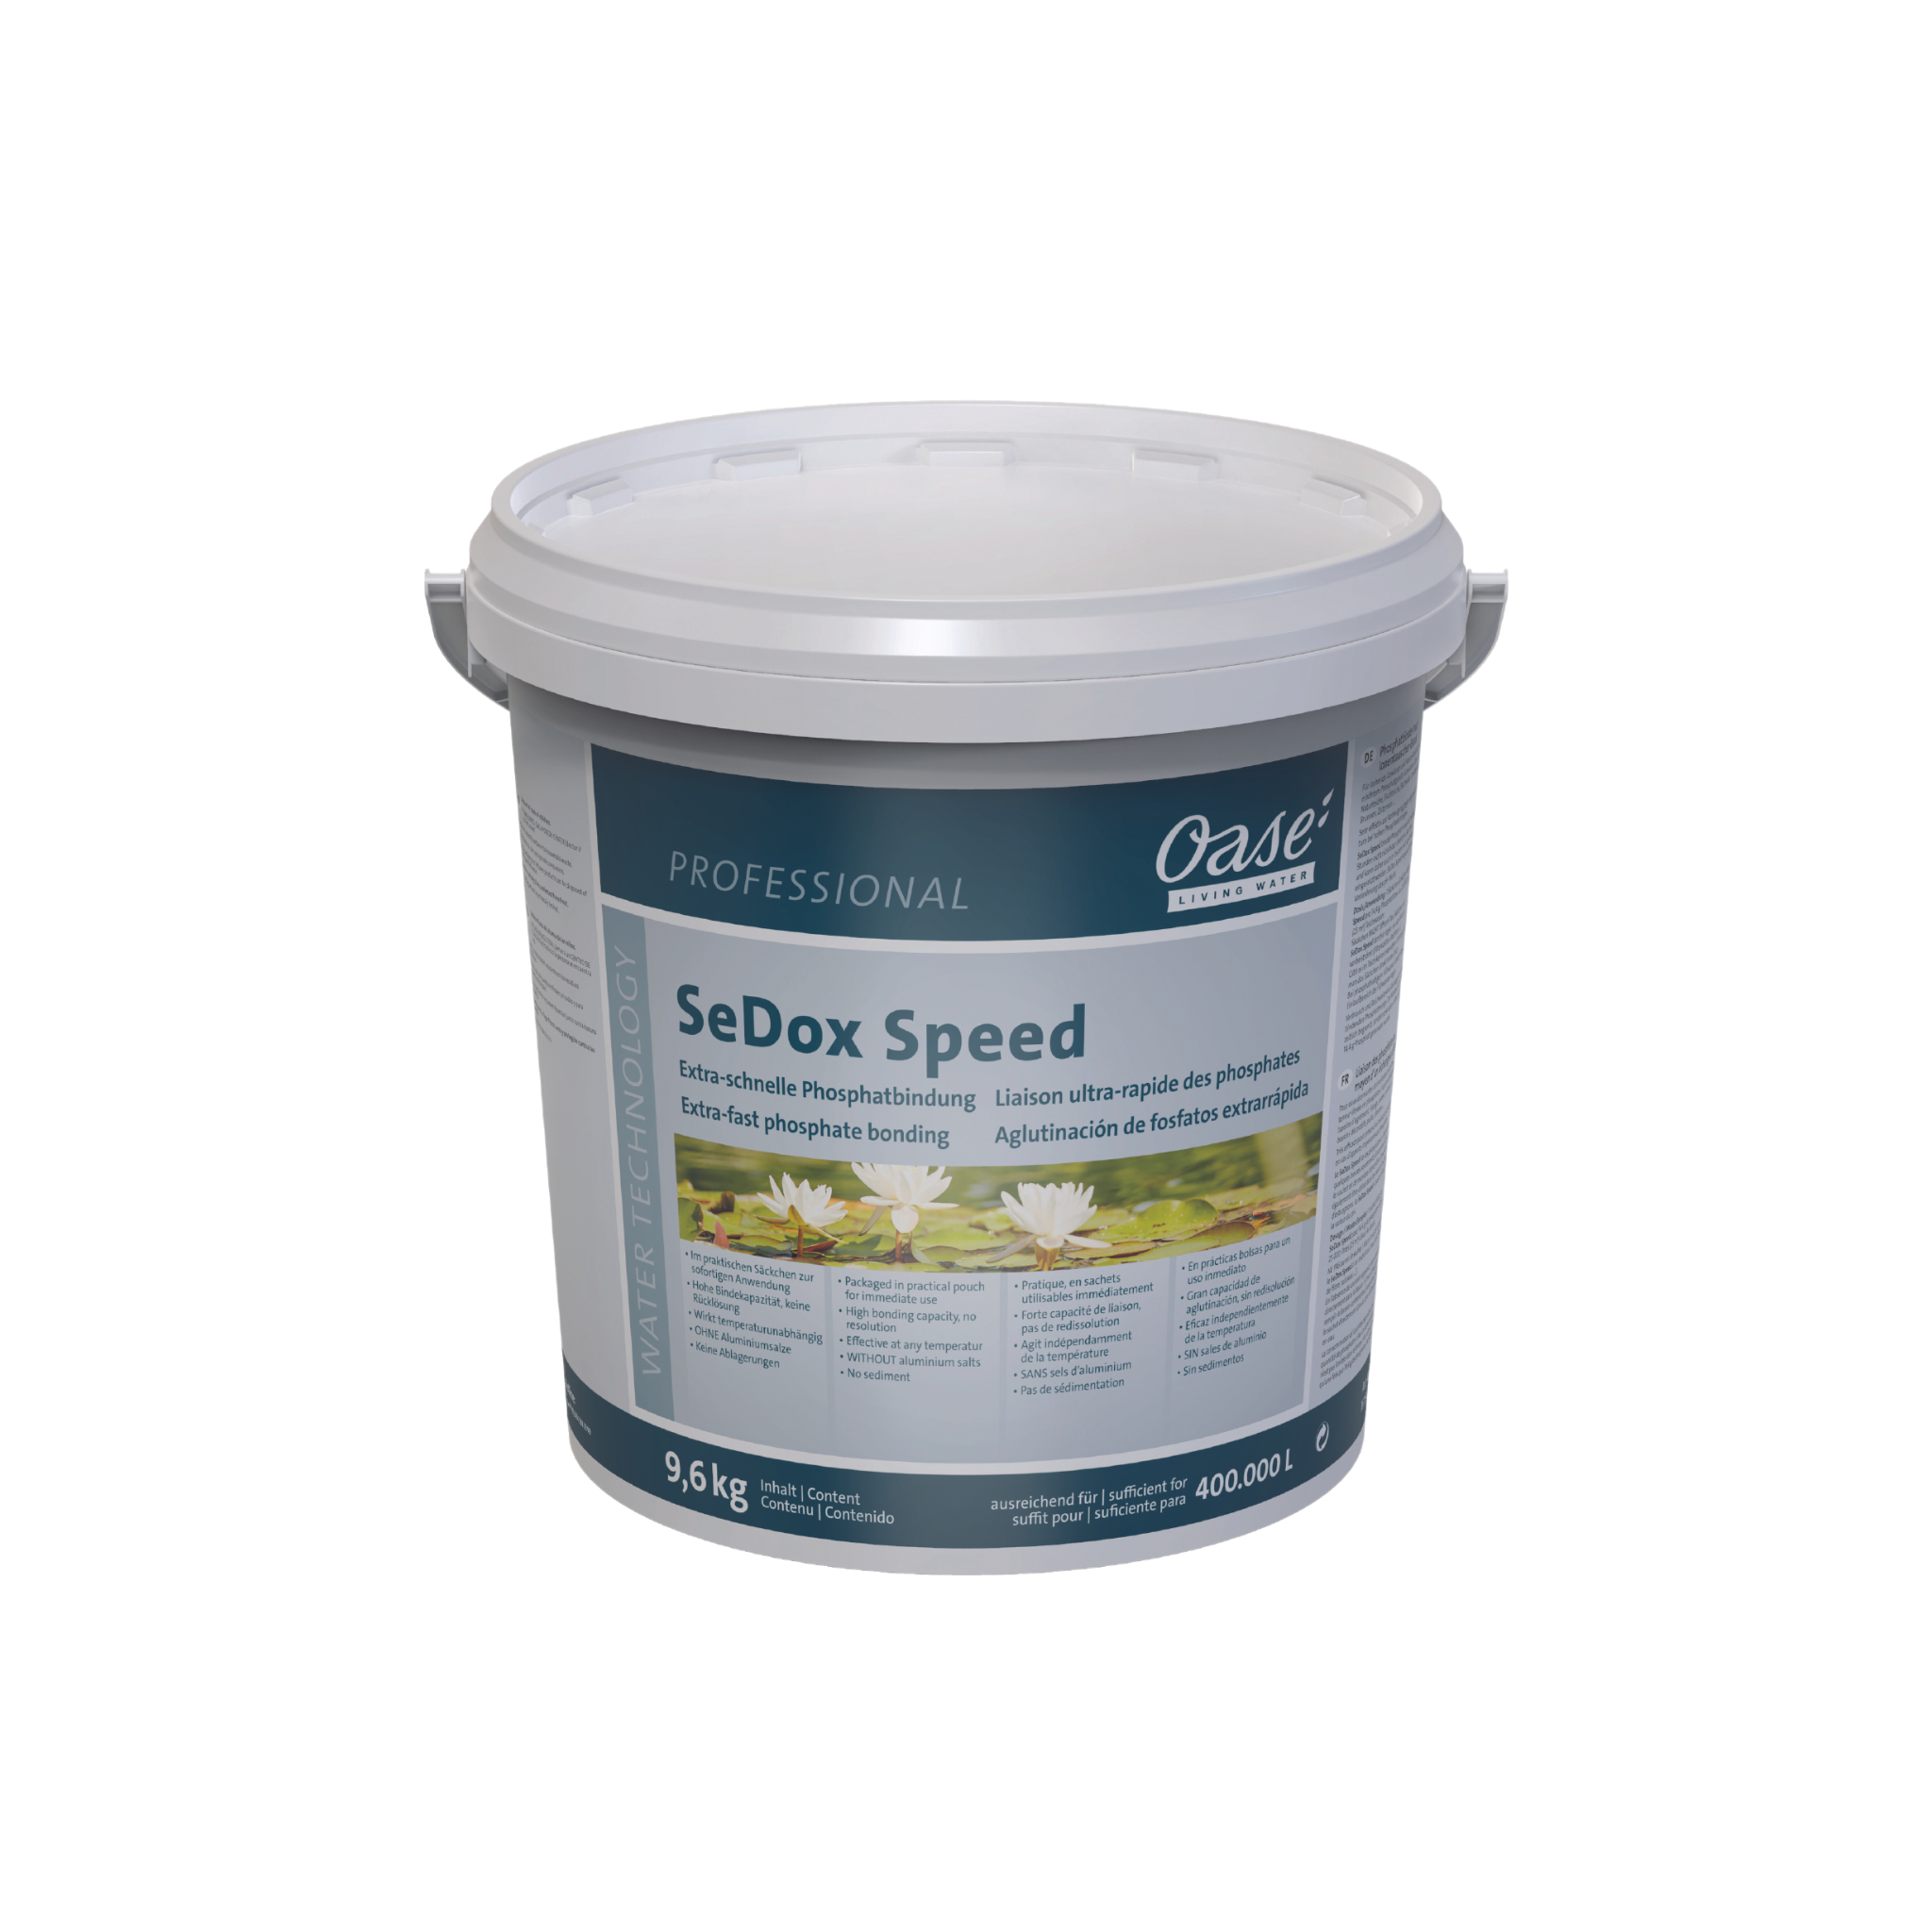 SeDox Speed by OASE. High contents of phosphates are insolubly bonded in only a few hoursWithout phosphate algal growth is limited.